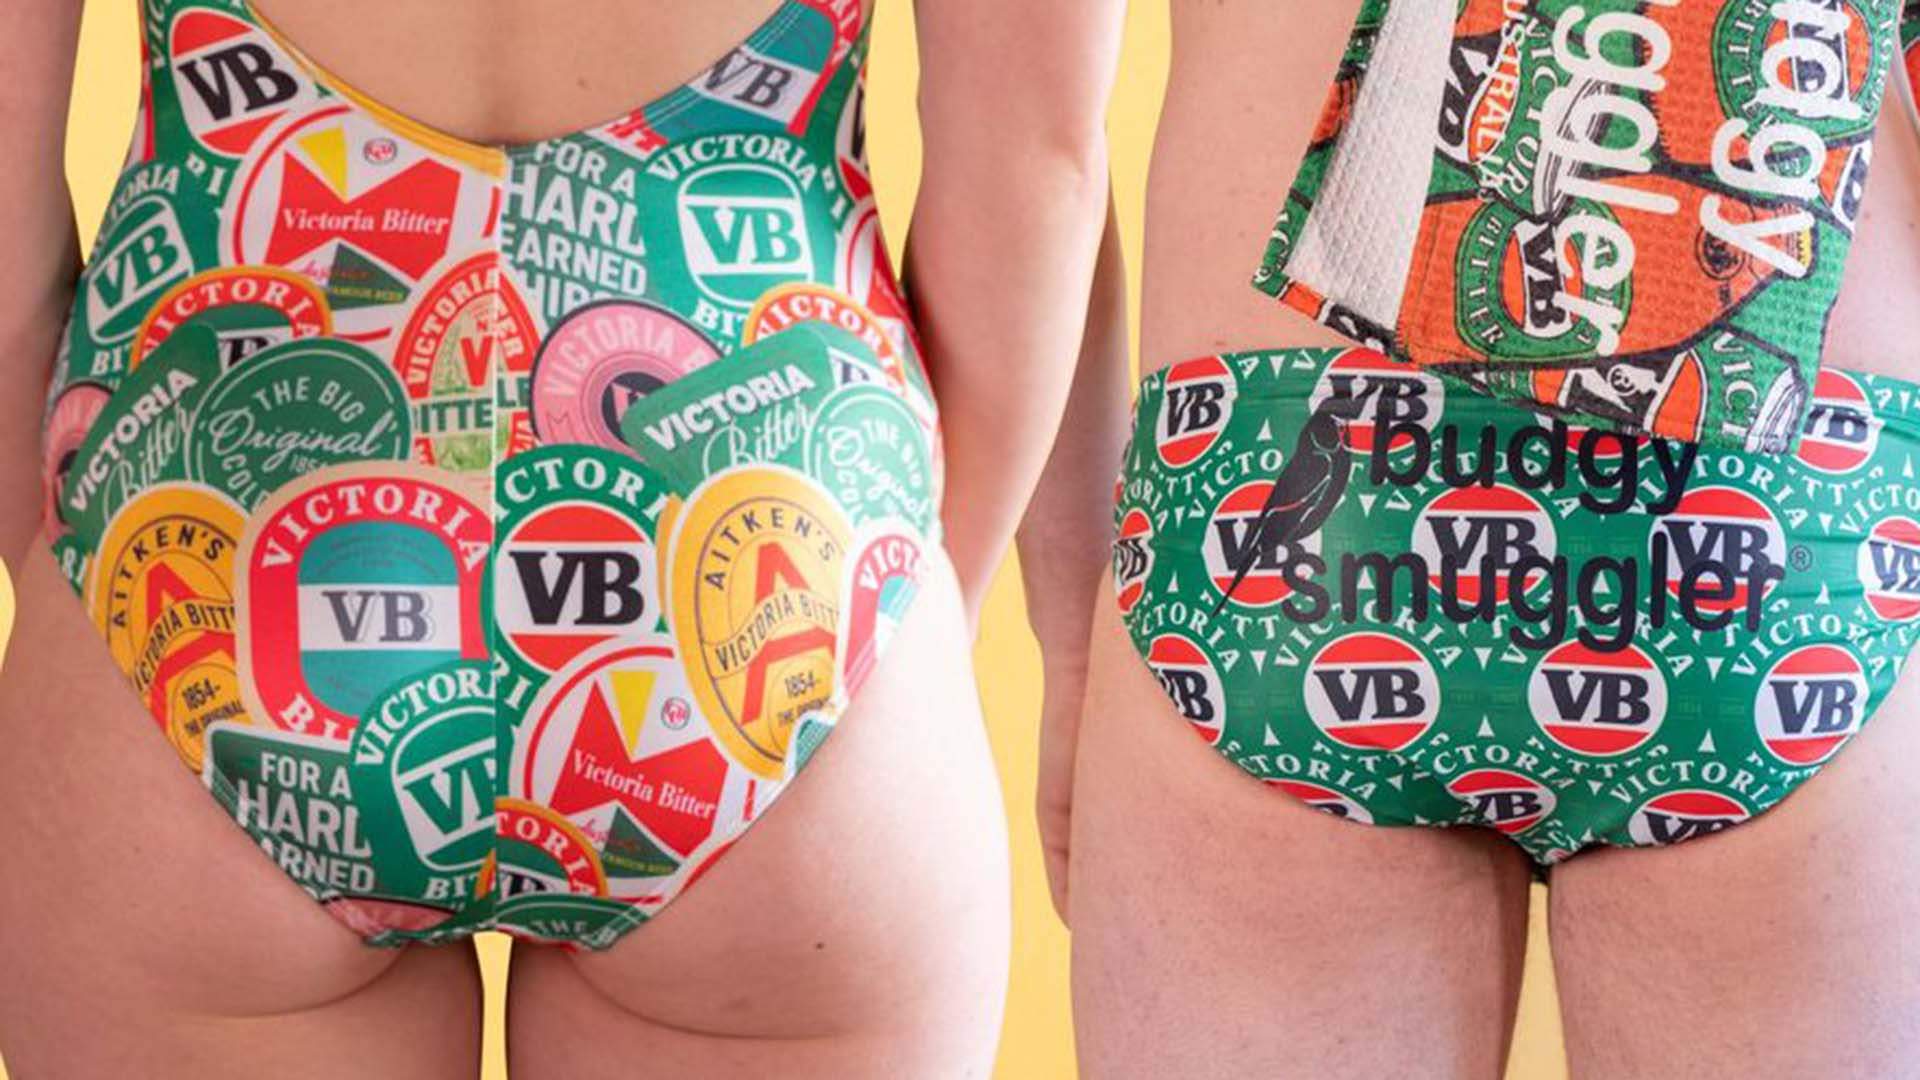 Victoria Bitter and Budgy Smuggler Have Released a Range of Retro VB-Themed  Swimwear - Concrete Playground